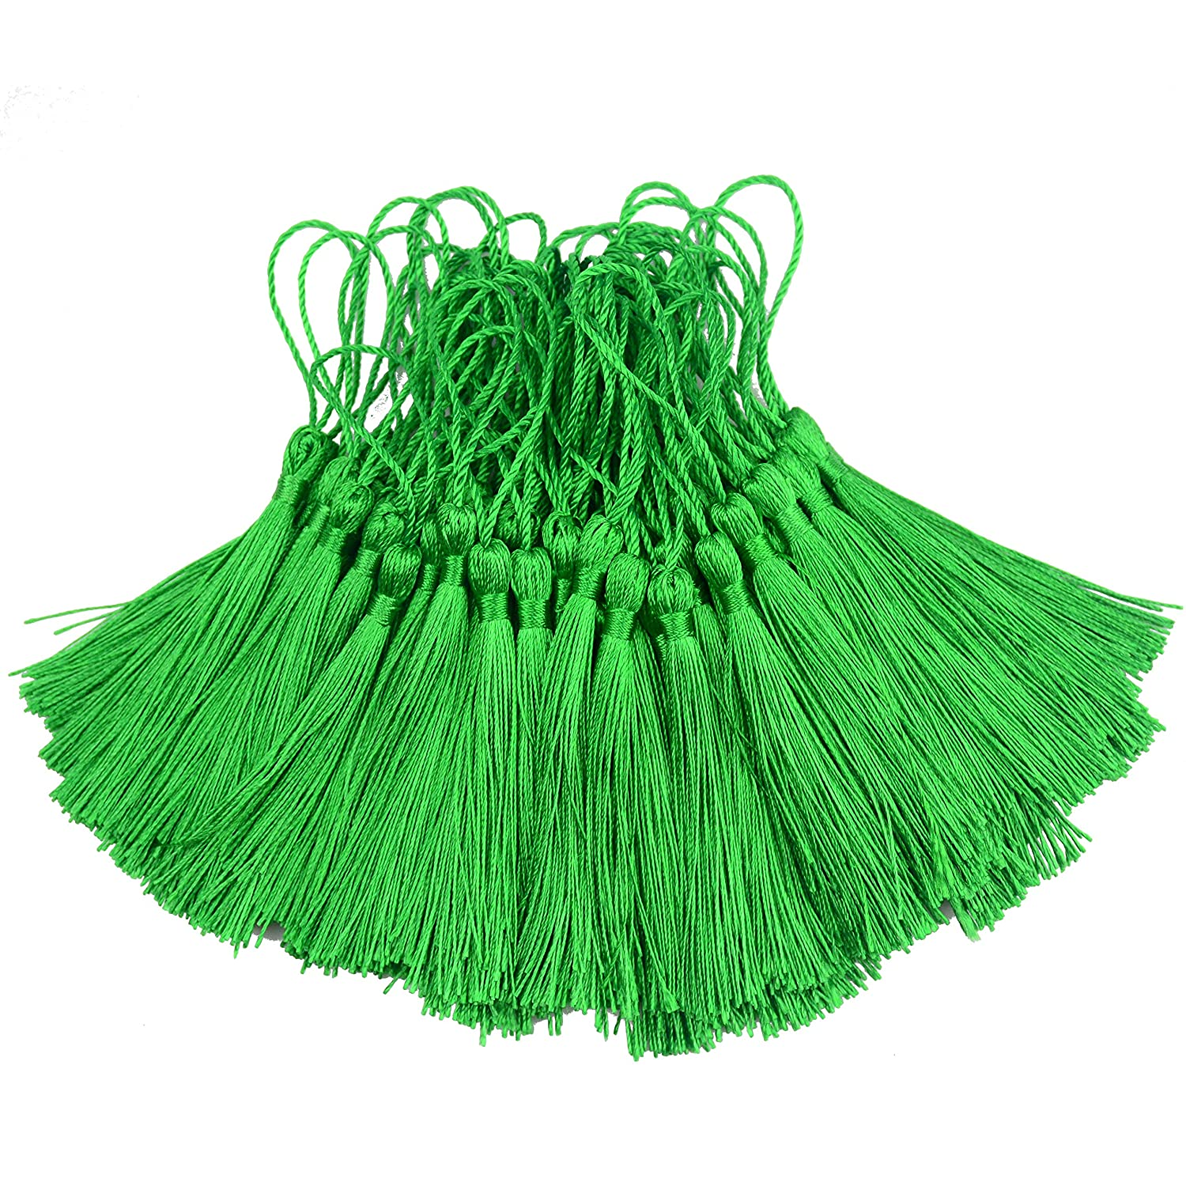 96 PCS Green Soft Craft Tassels with Loops for Jewelry Making, DIY, Bookmark, - WILLOW